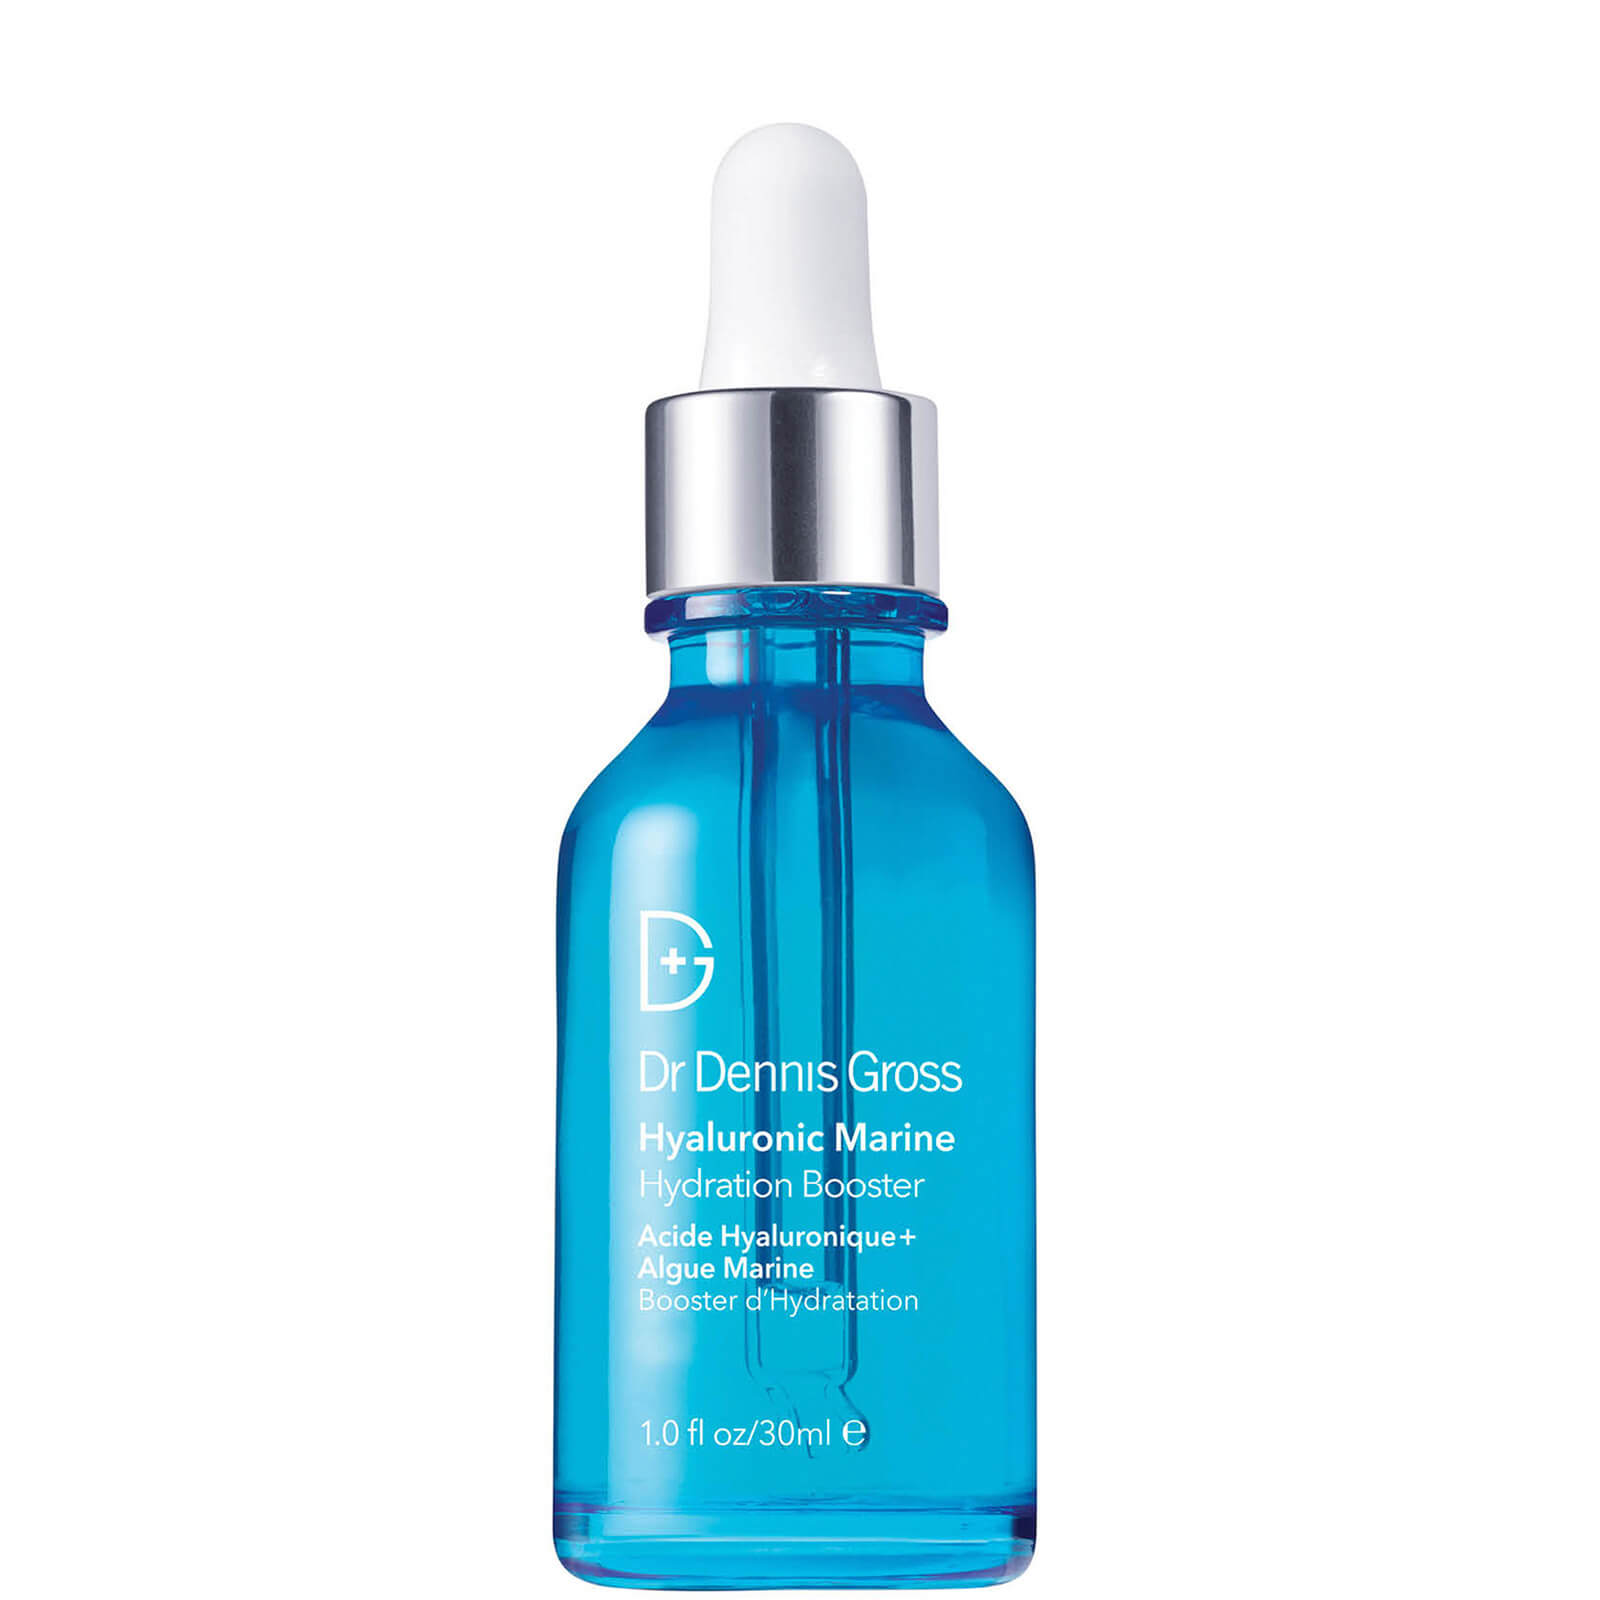 Image of Dr Dennis Gross Skincare Hyaluronic Marine Hydration Booster 30ml